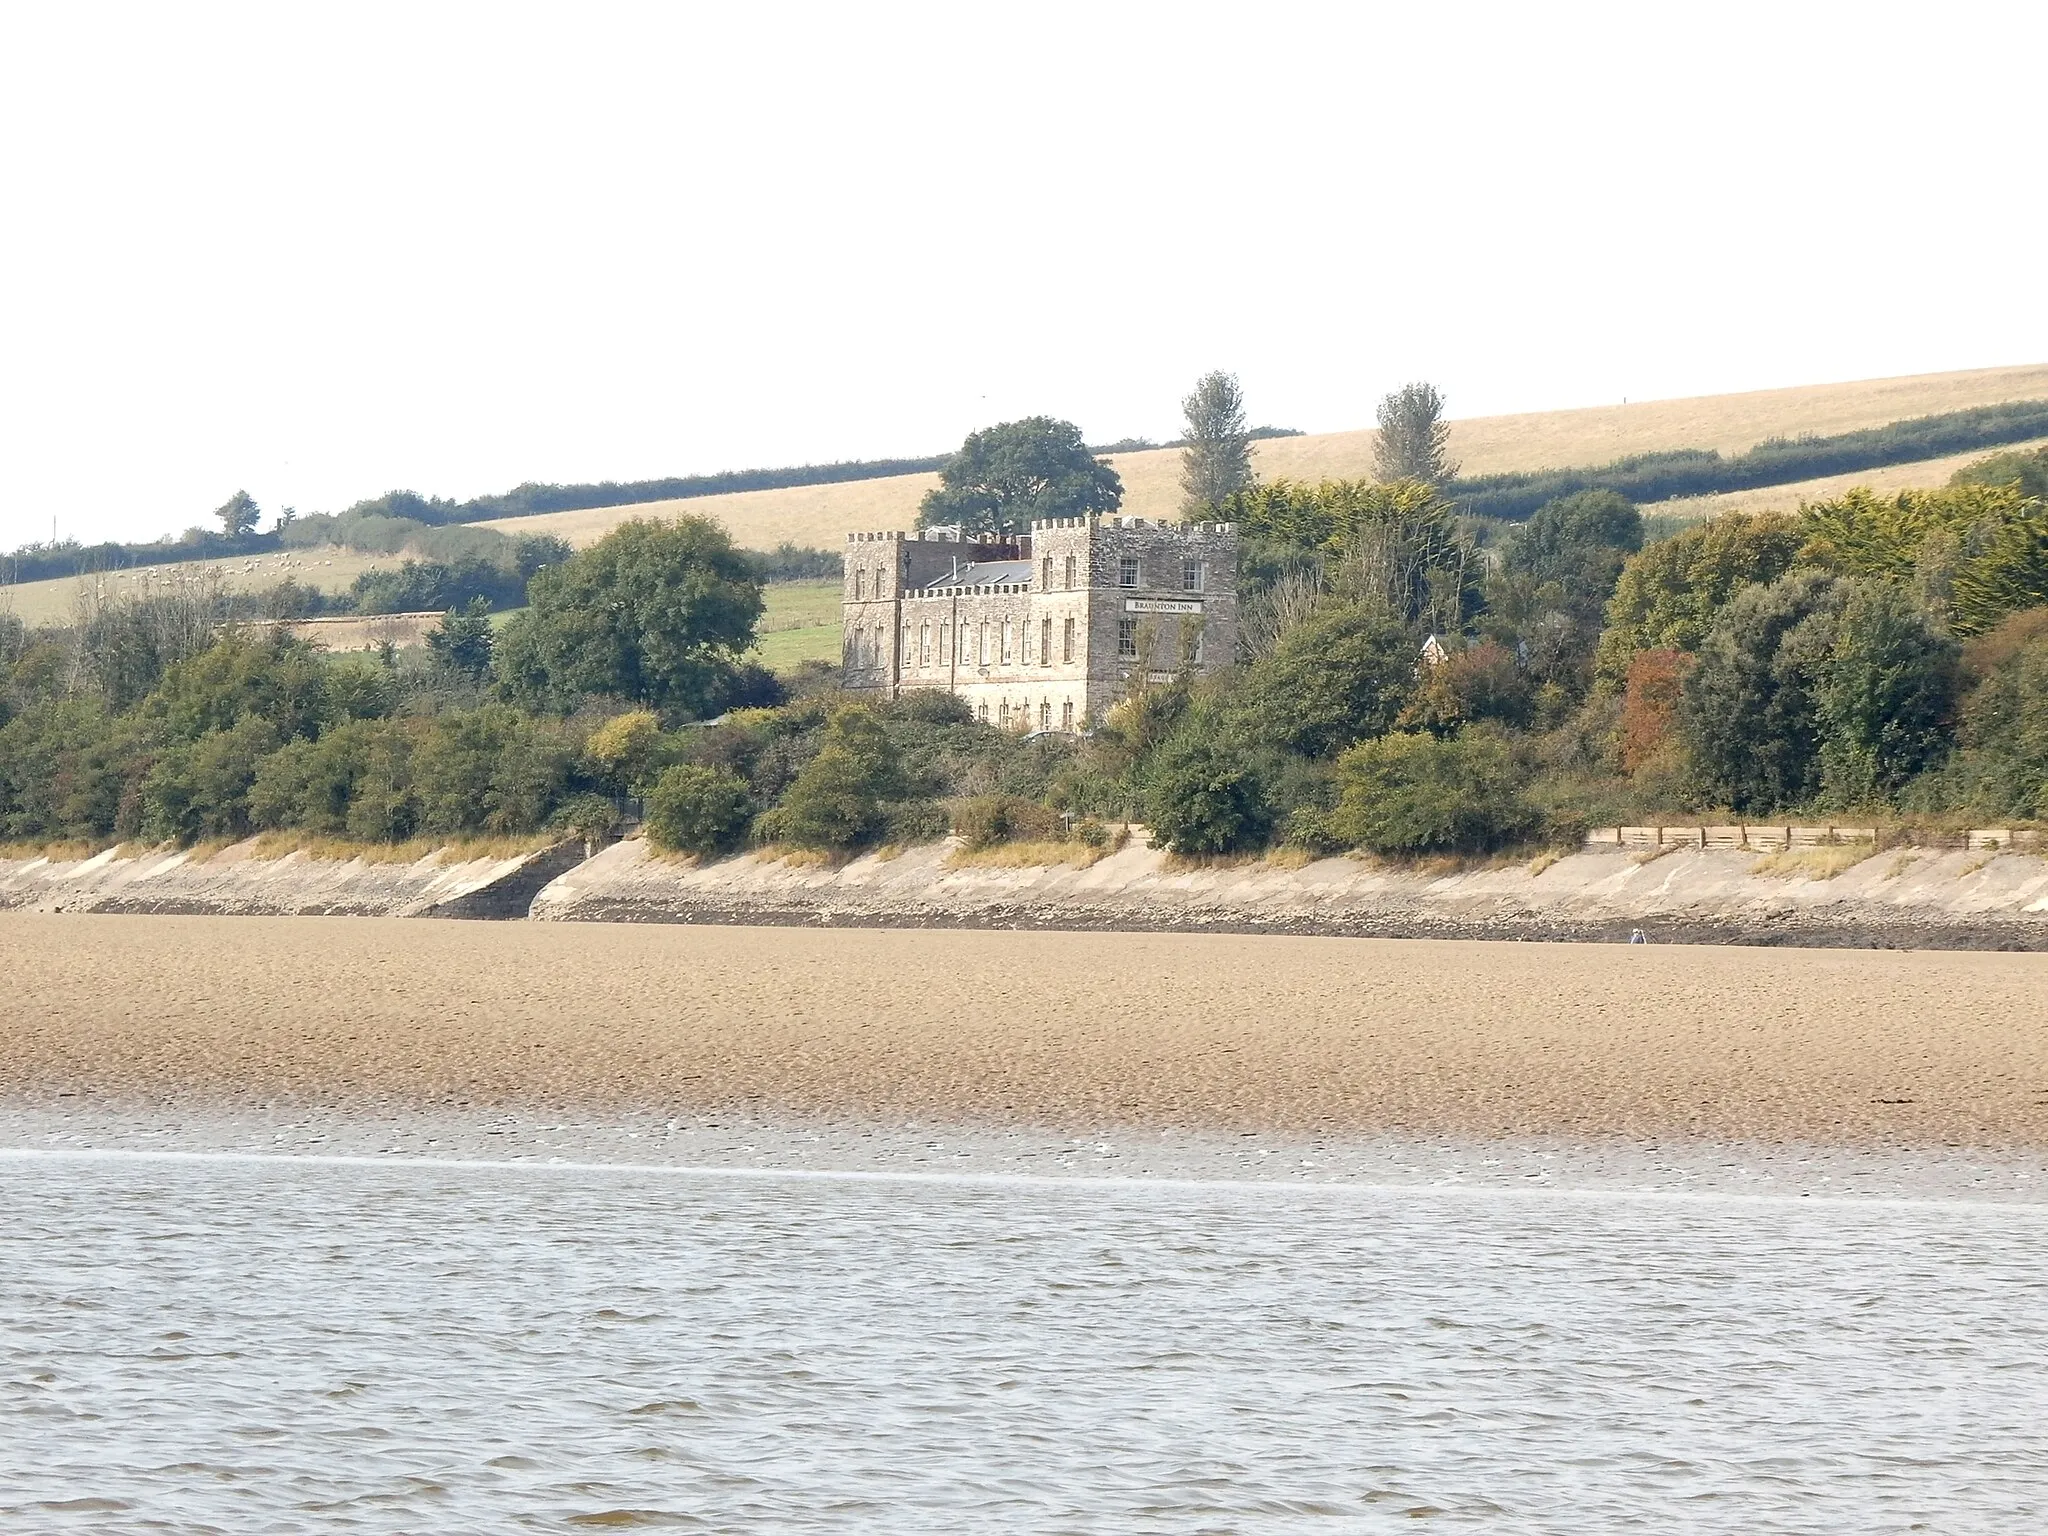 Photo showing: Heanton Court, Heanton Punchardon, North Devon, viewed from south at Penhill Point across the estuary of the River Taw at low tide